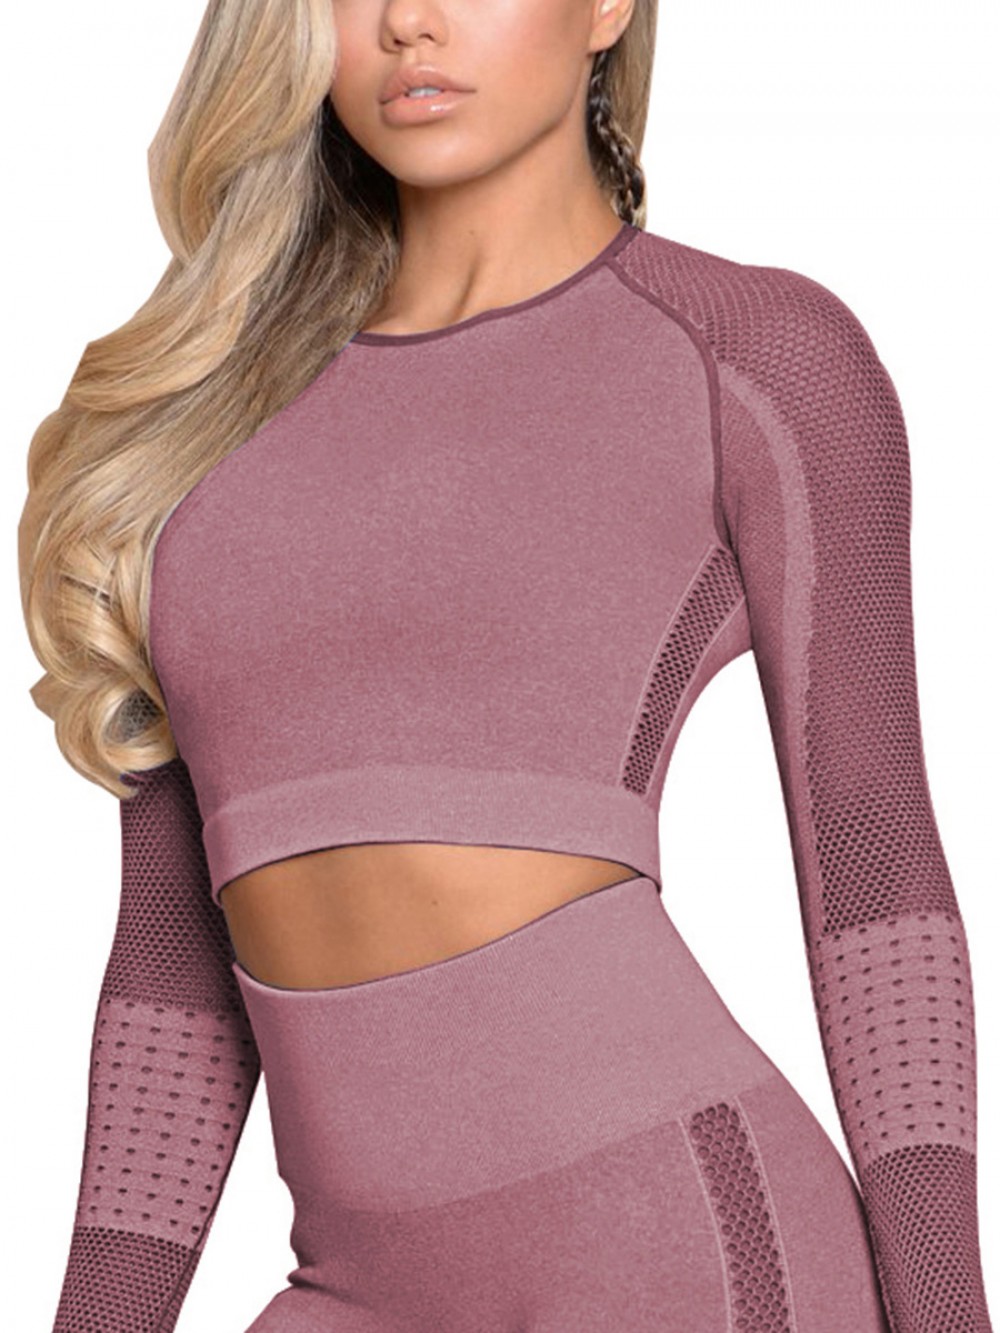 Sensual Silhouette Wine Red Mesh Patchwork Yoga Top Crew Neck For Ladies